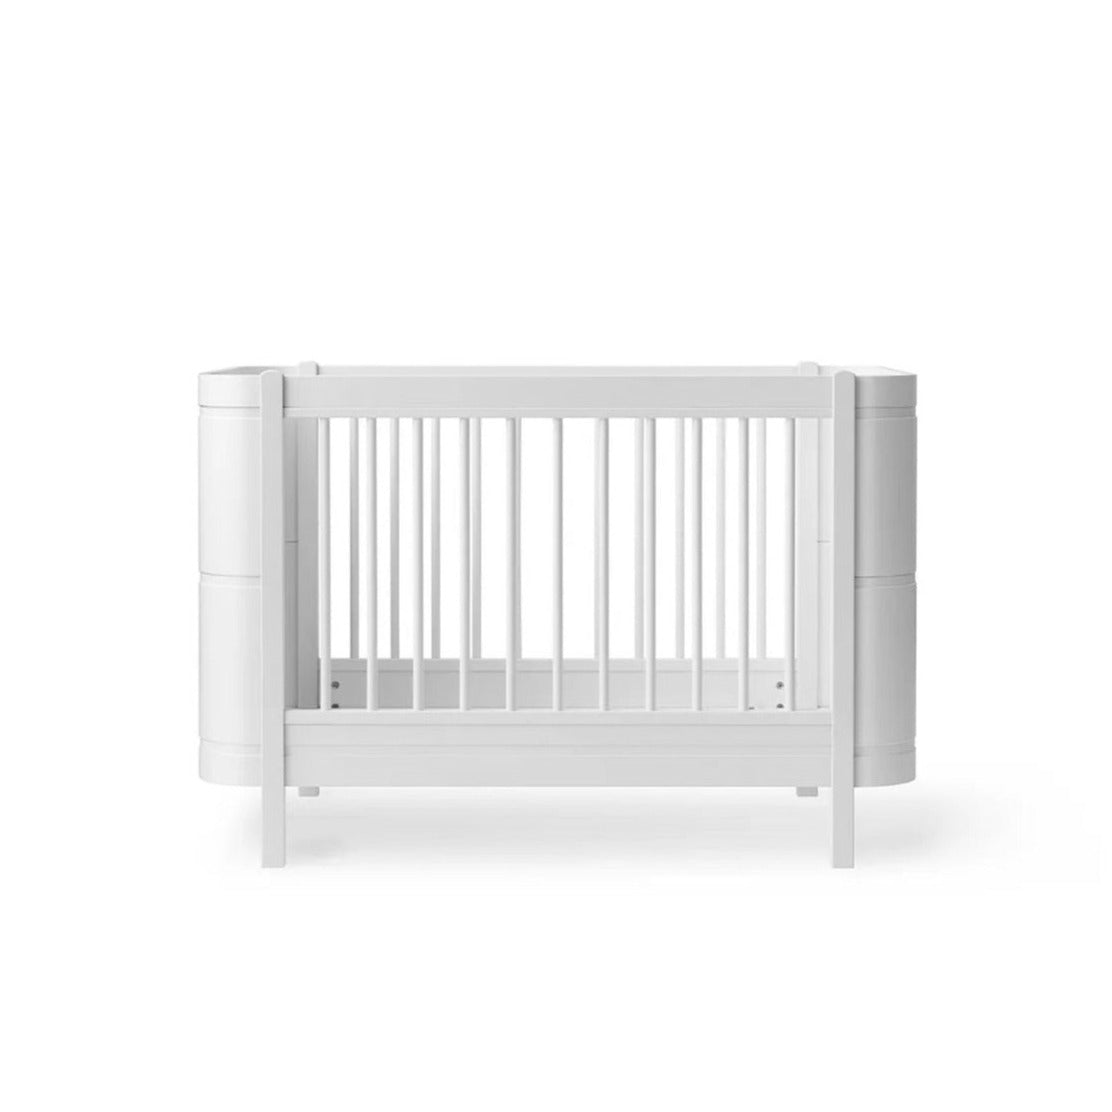 Oliver Furniture Wood Mini+ Cot Bed Excl. Junior Kit - White